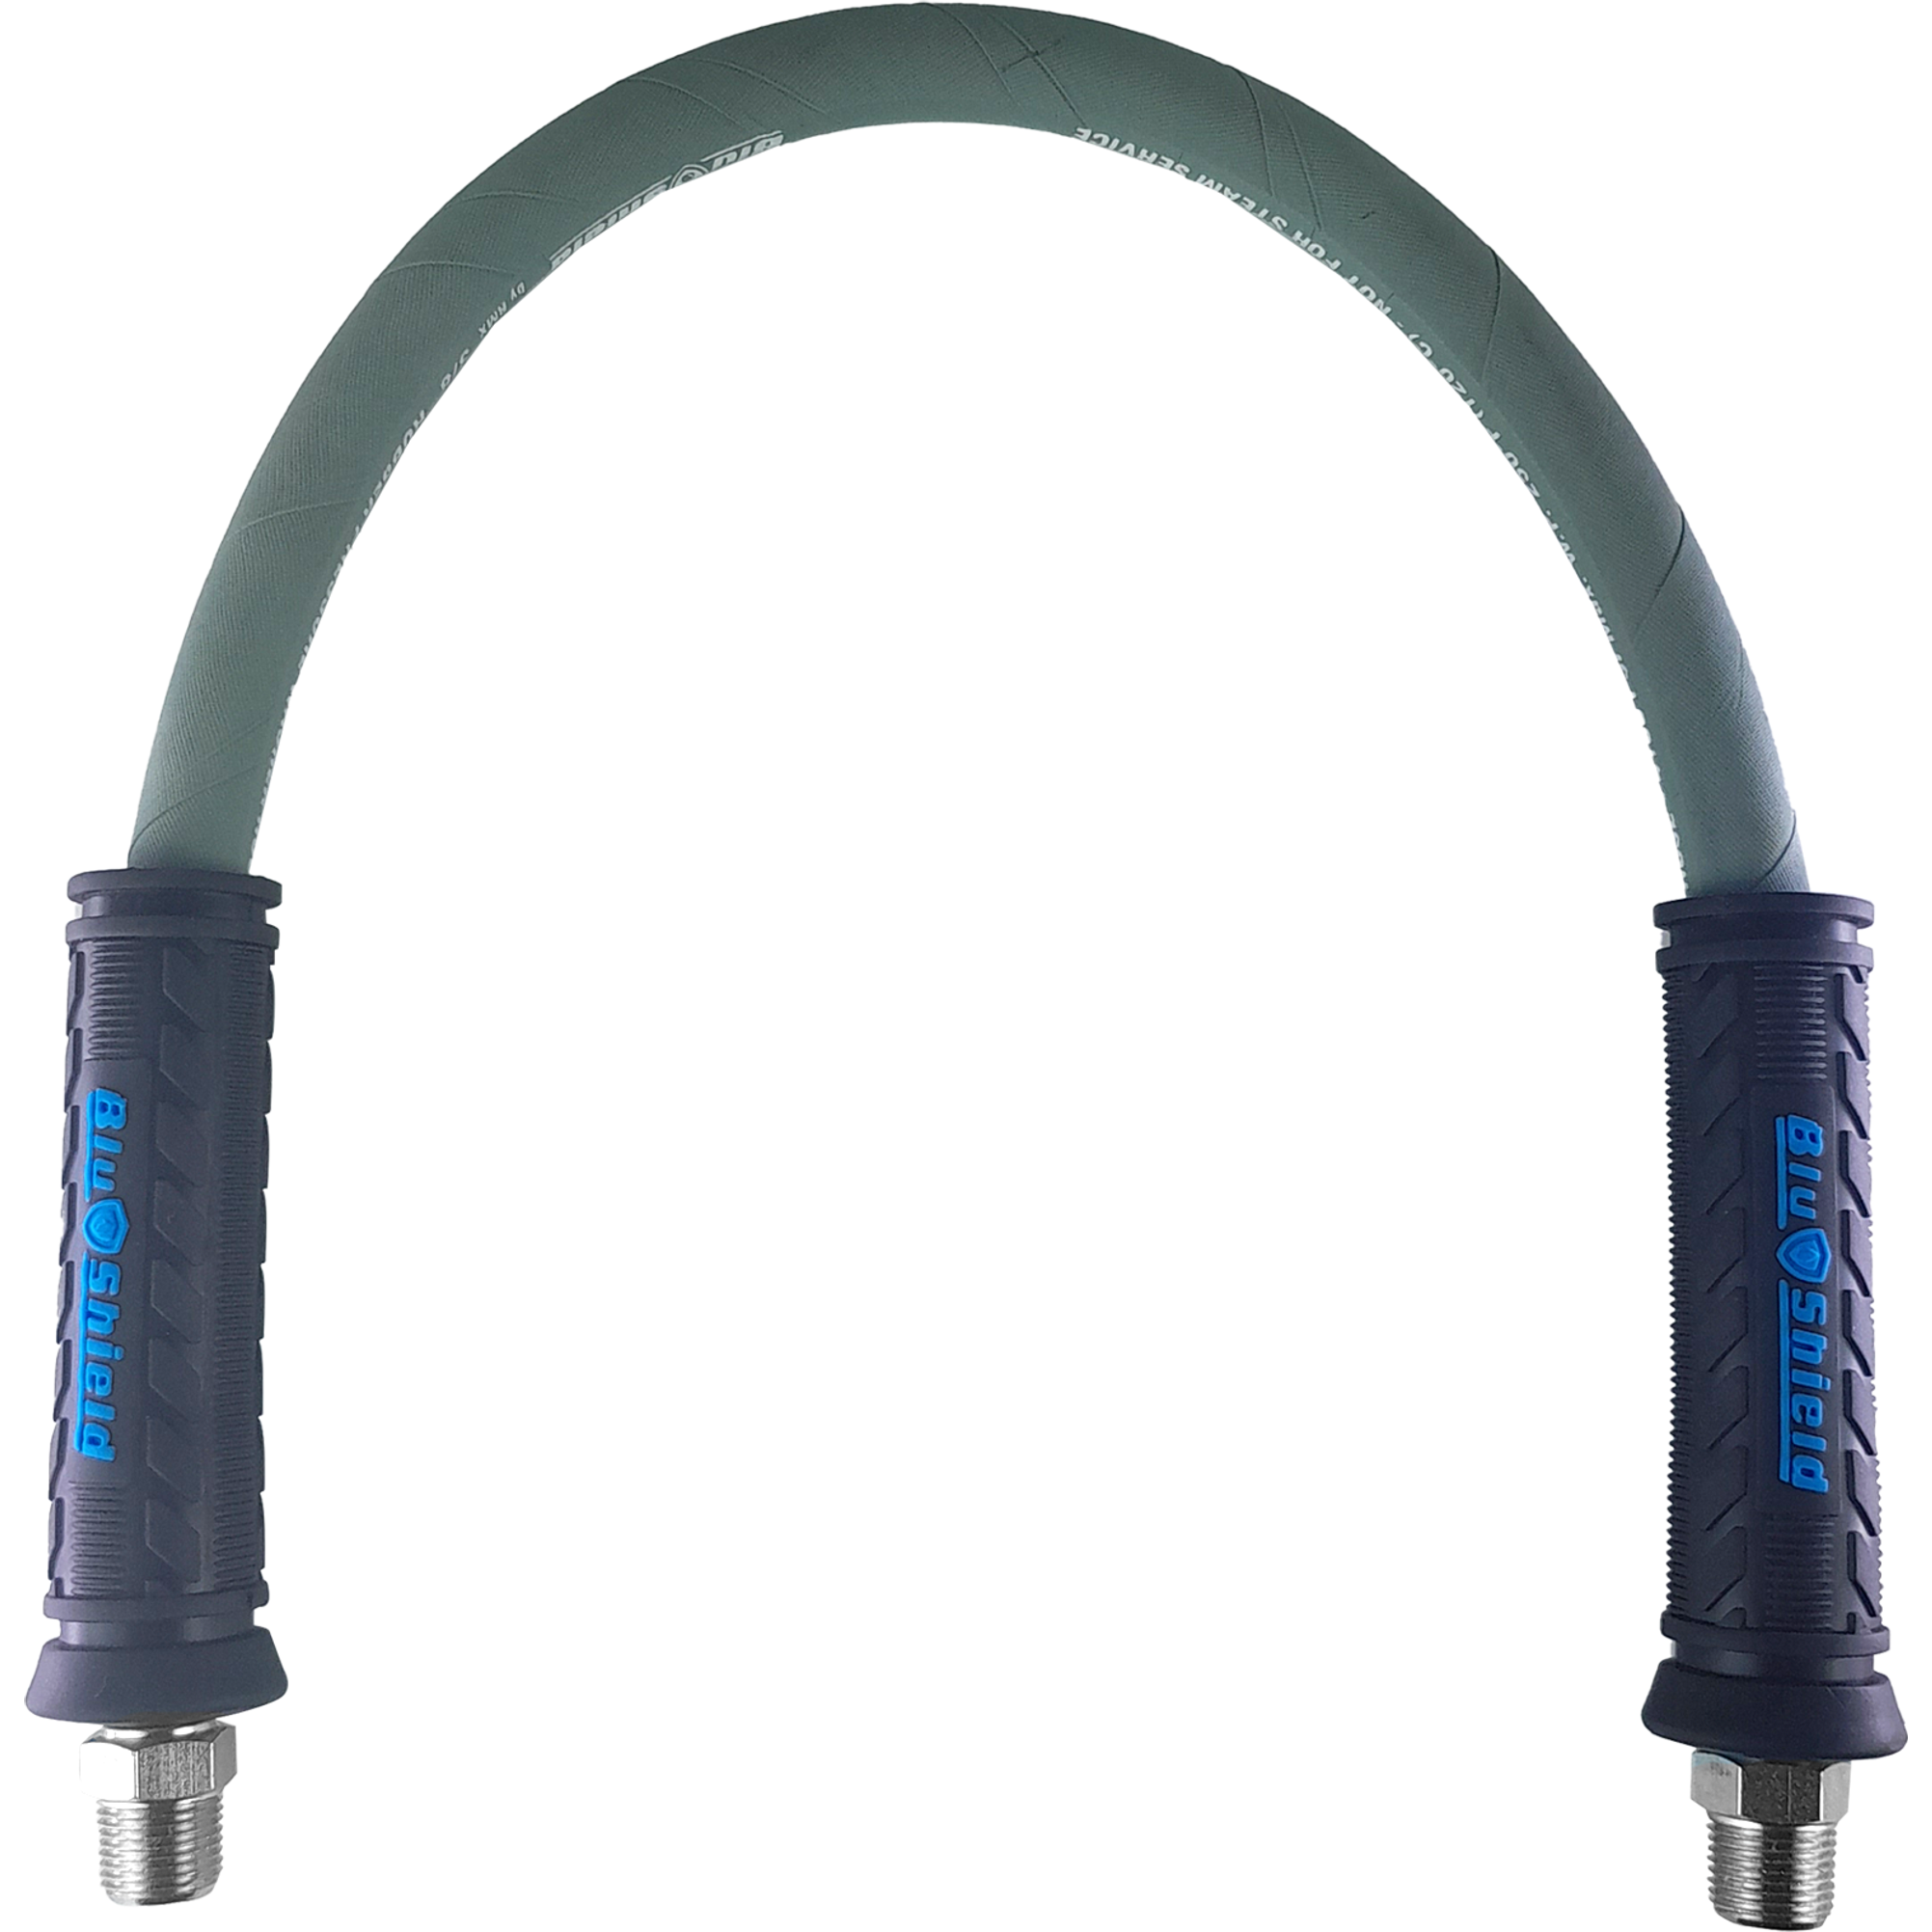 BluShield 3/8" Hose Reel Connector Jumper Hose, Aramid Braided, Non Marking, 4100 PSI with 3/8" MNPT